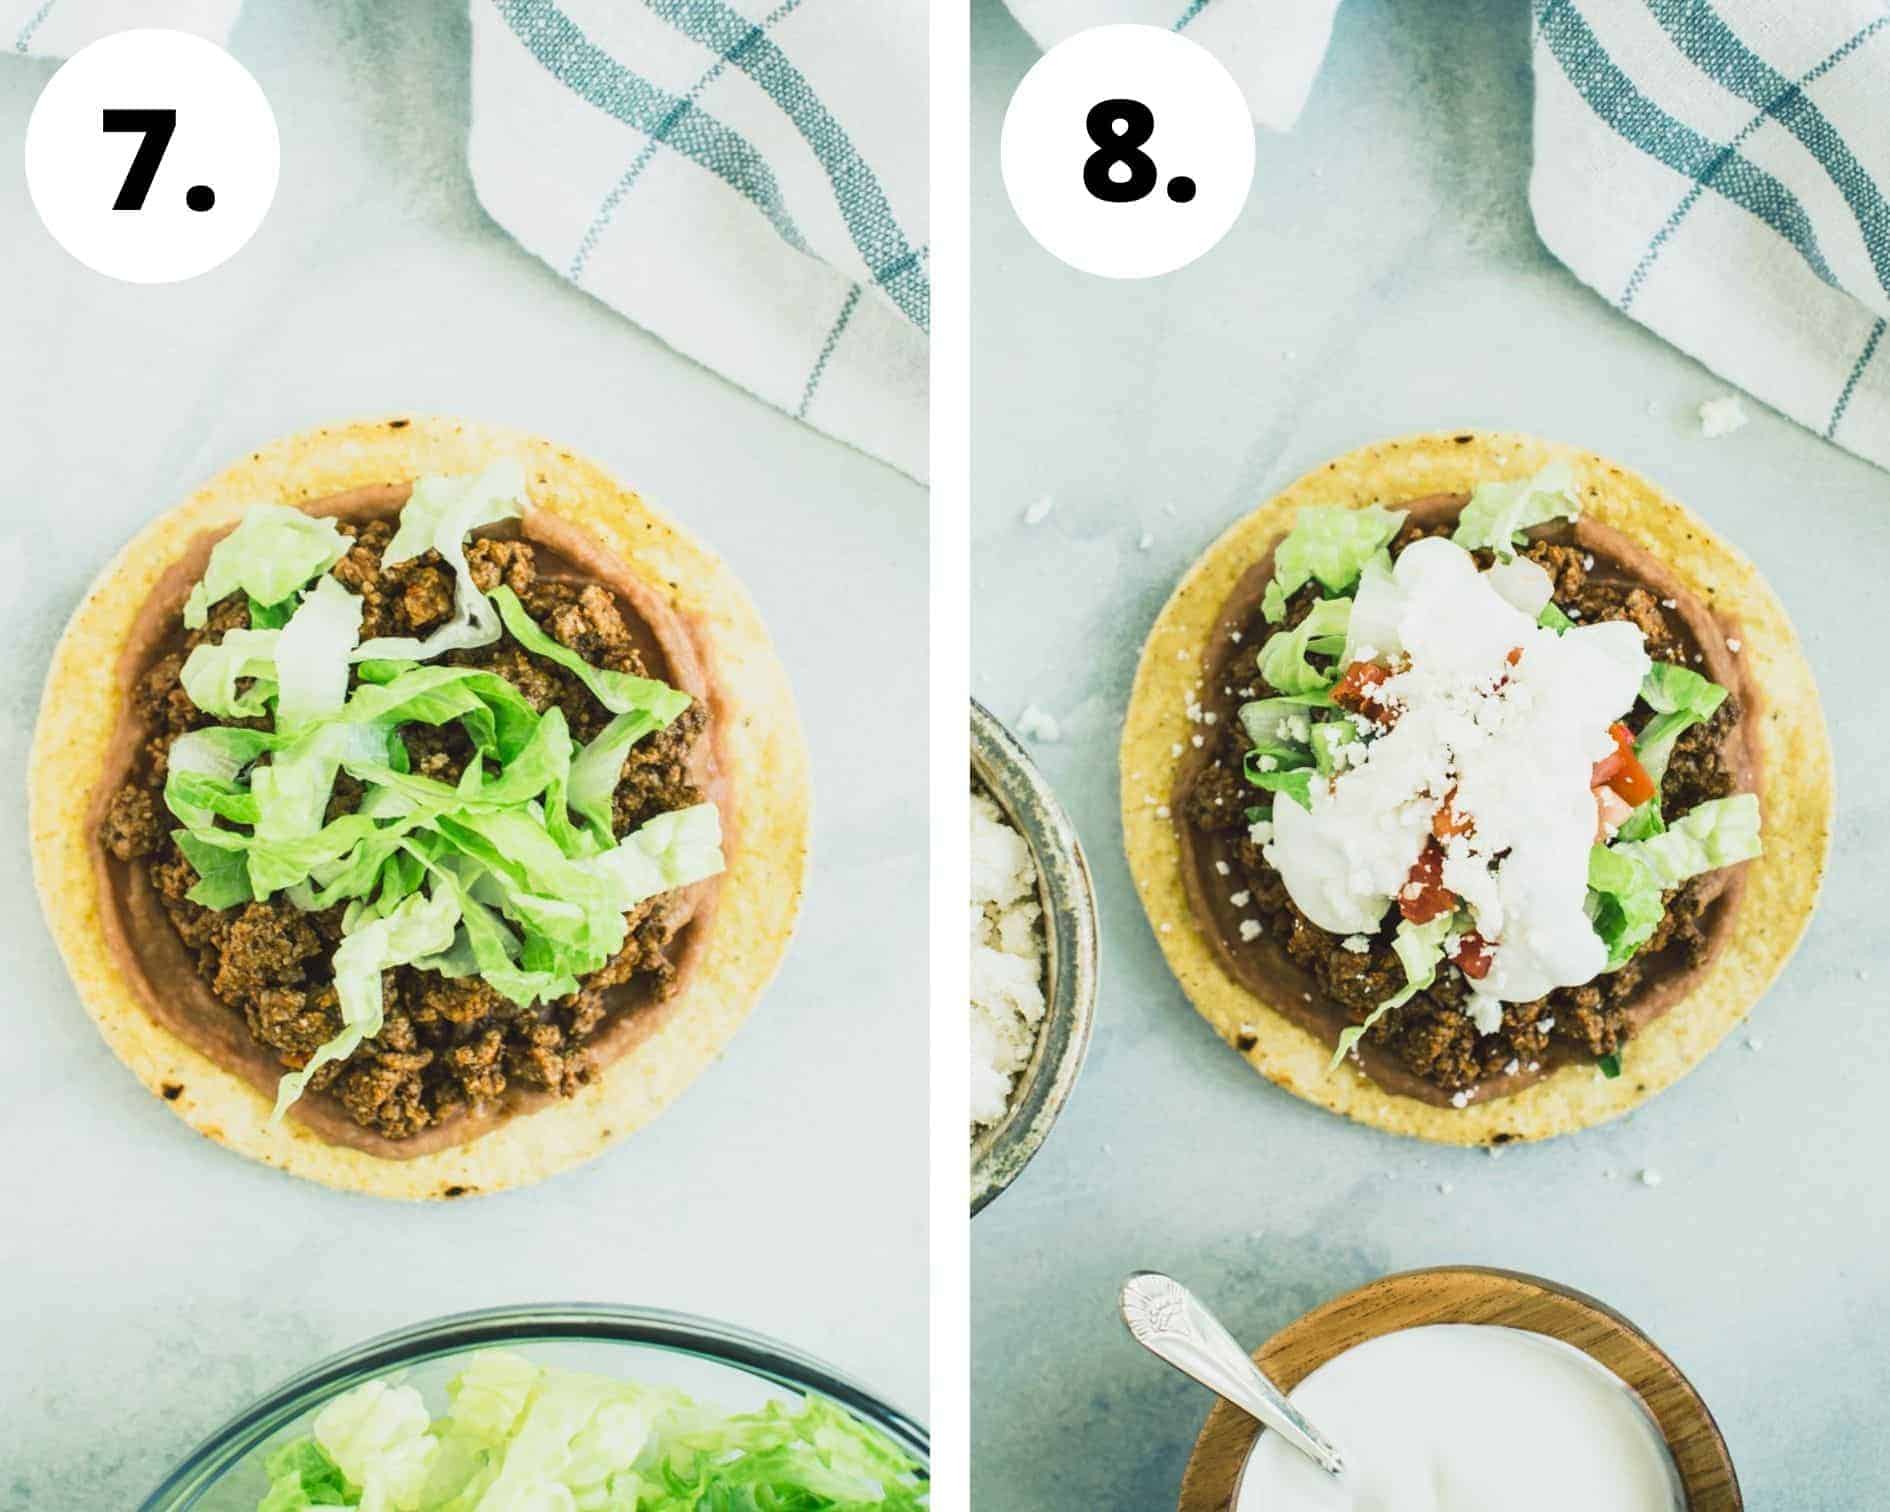 Beef tostadas process steps 7 and 8.